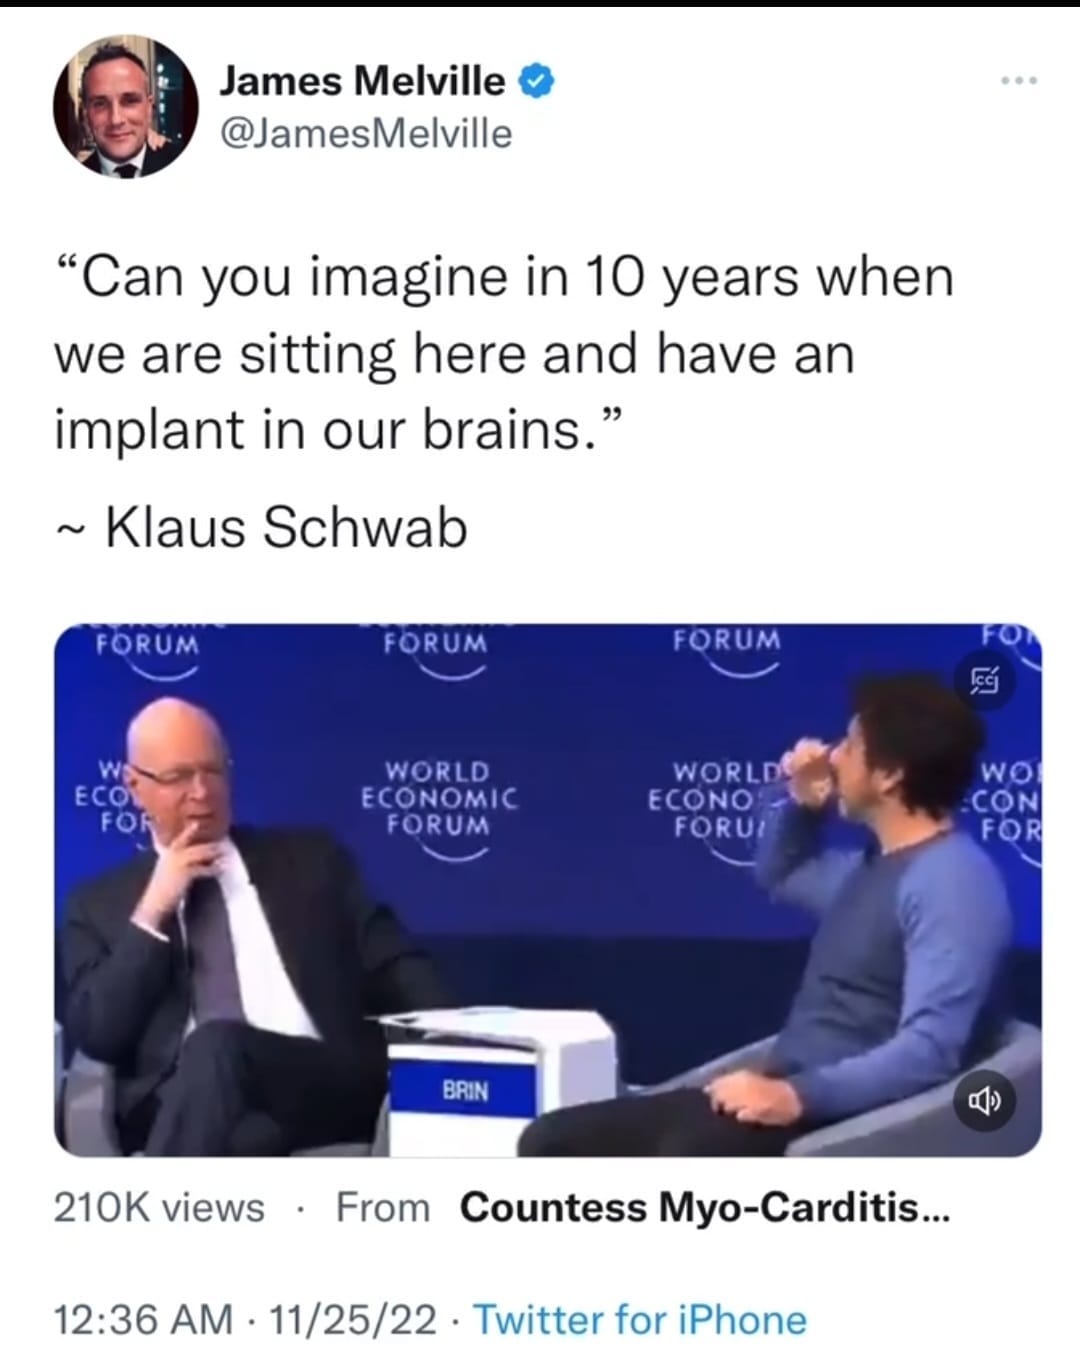 May be an image of 3 people and text that says 'James Melville @JamesMelville "Can you imagine in 10 years when we are sitting here and have an implant in our brains." ~Klaus Schwab FORUM FORUM FORUM WORLD ECONOMIC FORUM WORLD ECONO FORUI wO CON FOR BRIN 210K views From Countess Myo-Carditis... 12:36 AM 11/25/22 Twitter for iPhone'